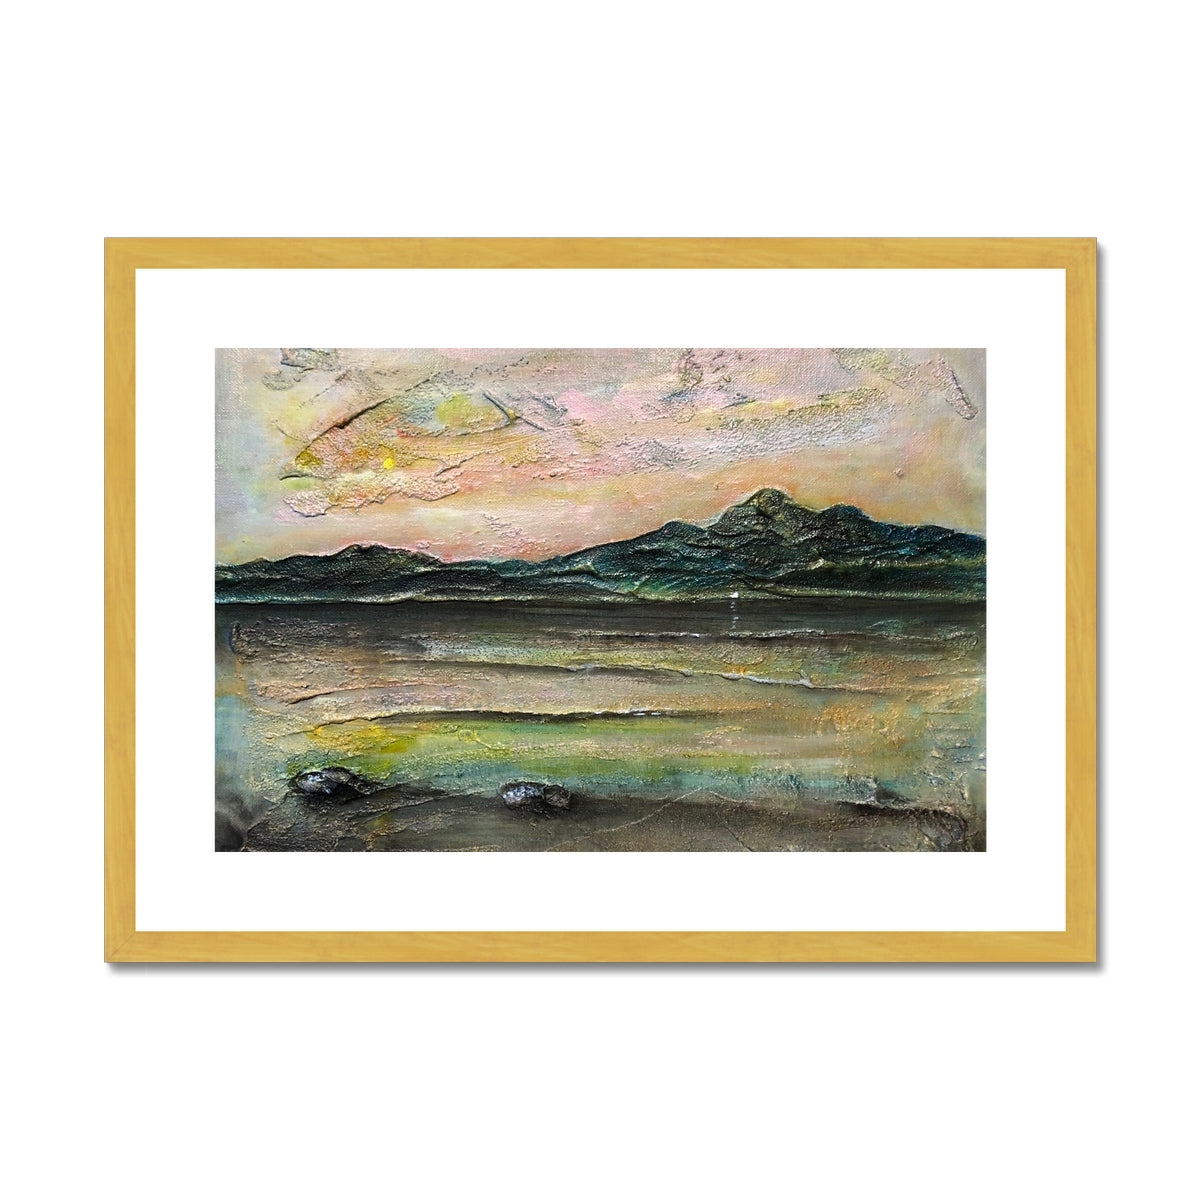 An Ethereal Loch Na Dal Skye Painting | Antique Framed & Mounted Prints From Scotland-Fine art-Scottish Lochs & Mountains Art Gallery-A2 Landscape-Gold Frame-Paintings, Prints, Homeware, Art Gifts From Scotland By Scottish Artist Kevin Hunter